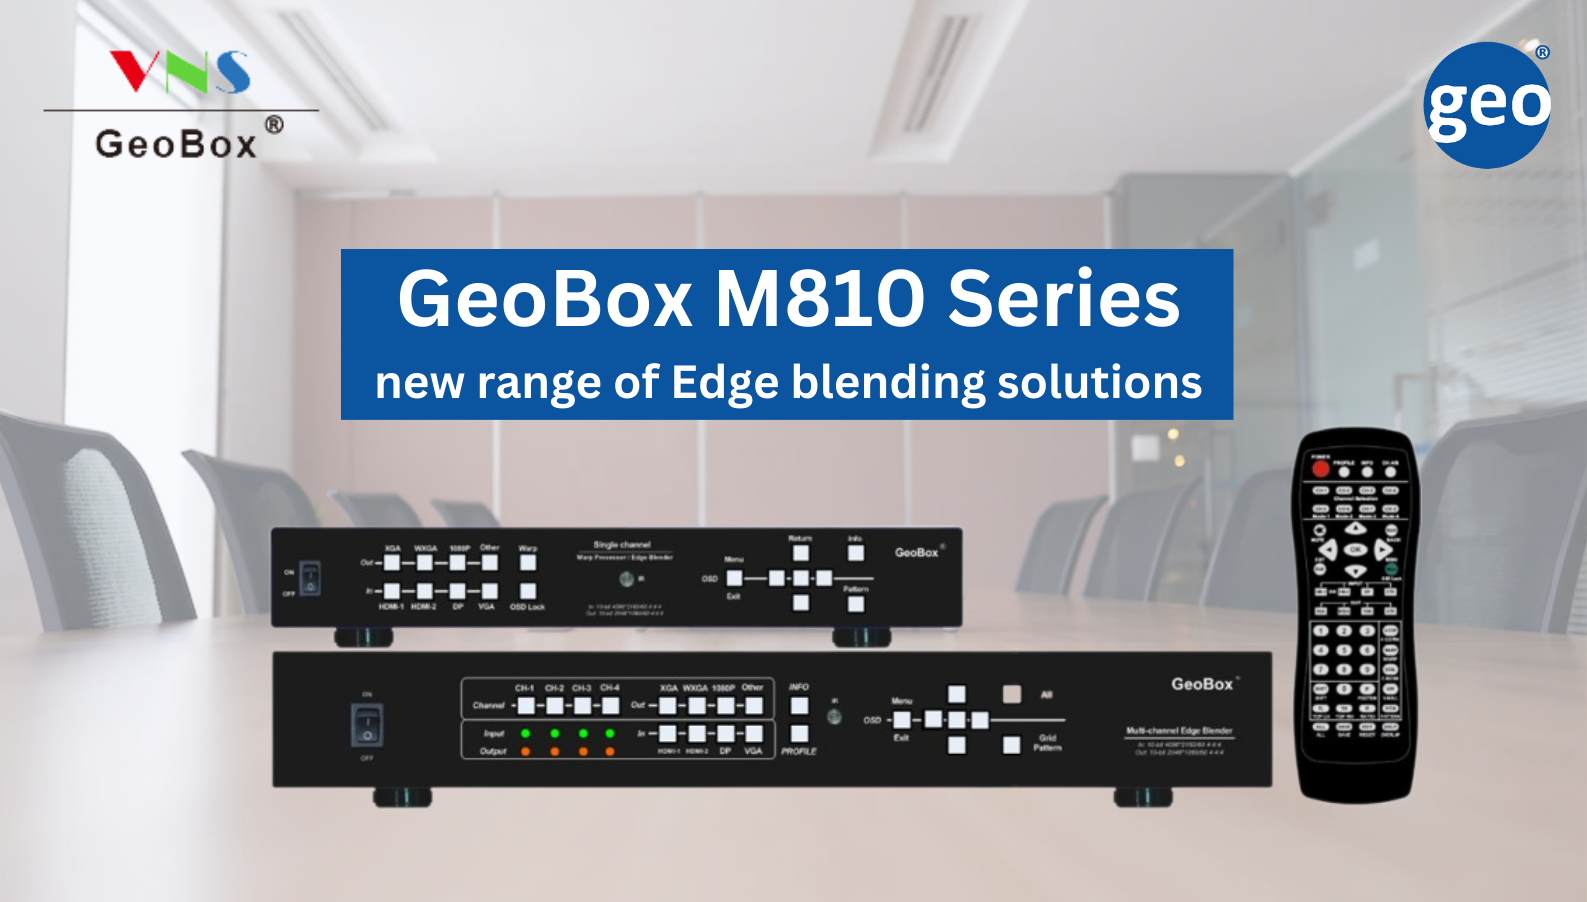 MatrixWorks: GeoBox M810 series provides an easy configuration, cost-effective, and reliable for a new range of Edge blending solutions.